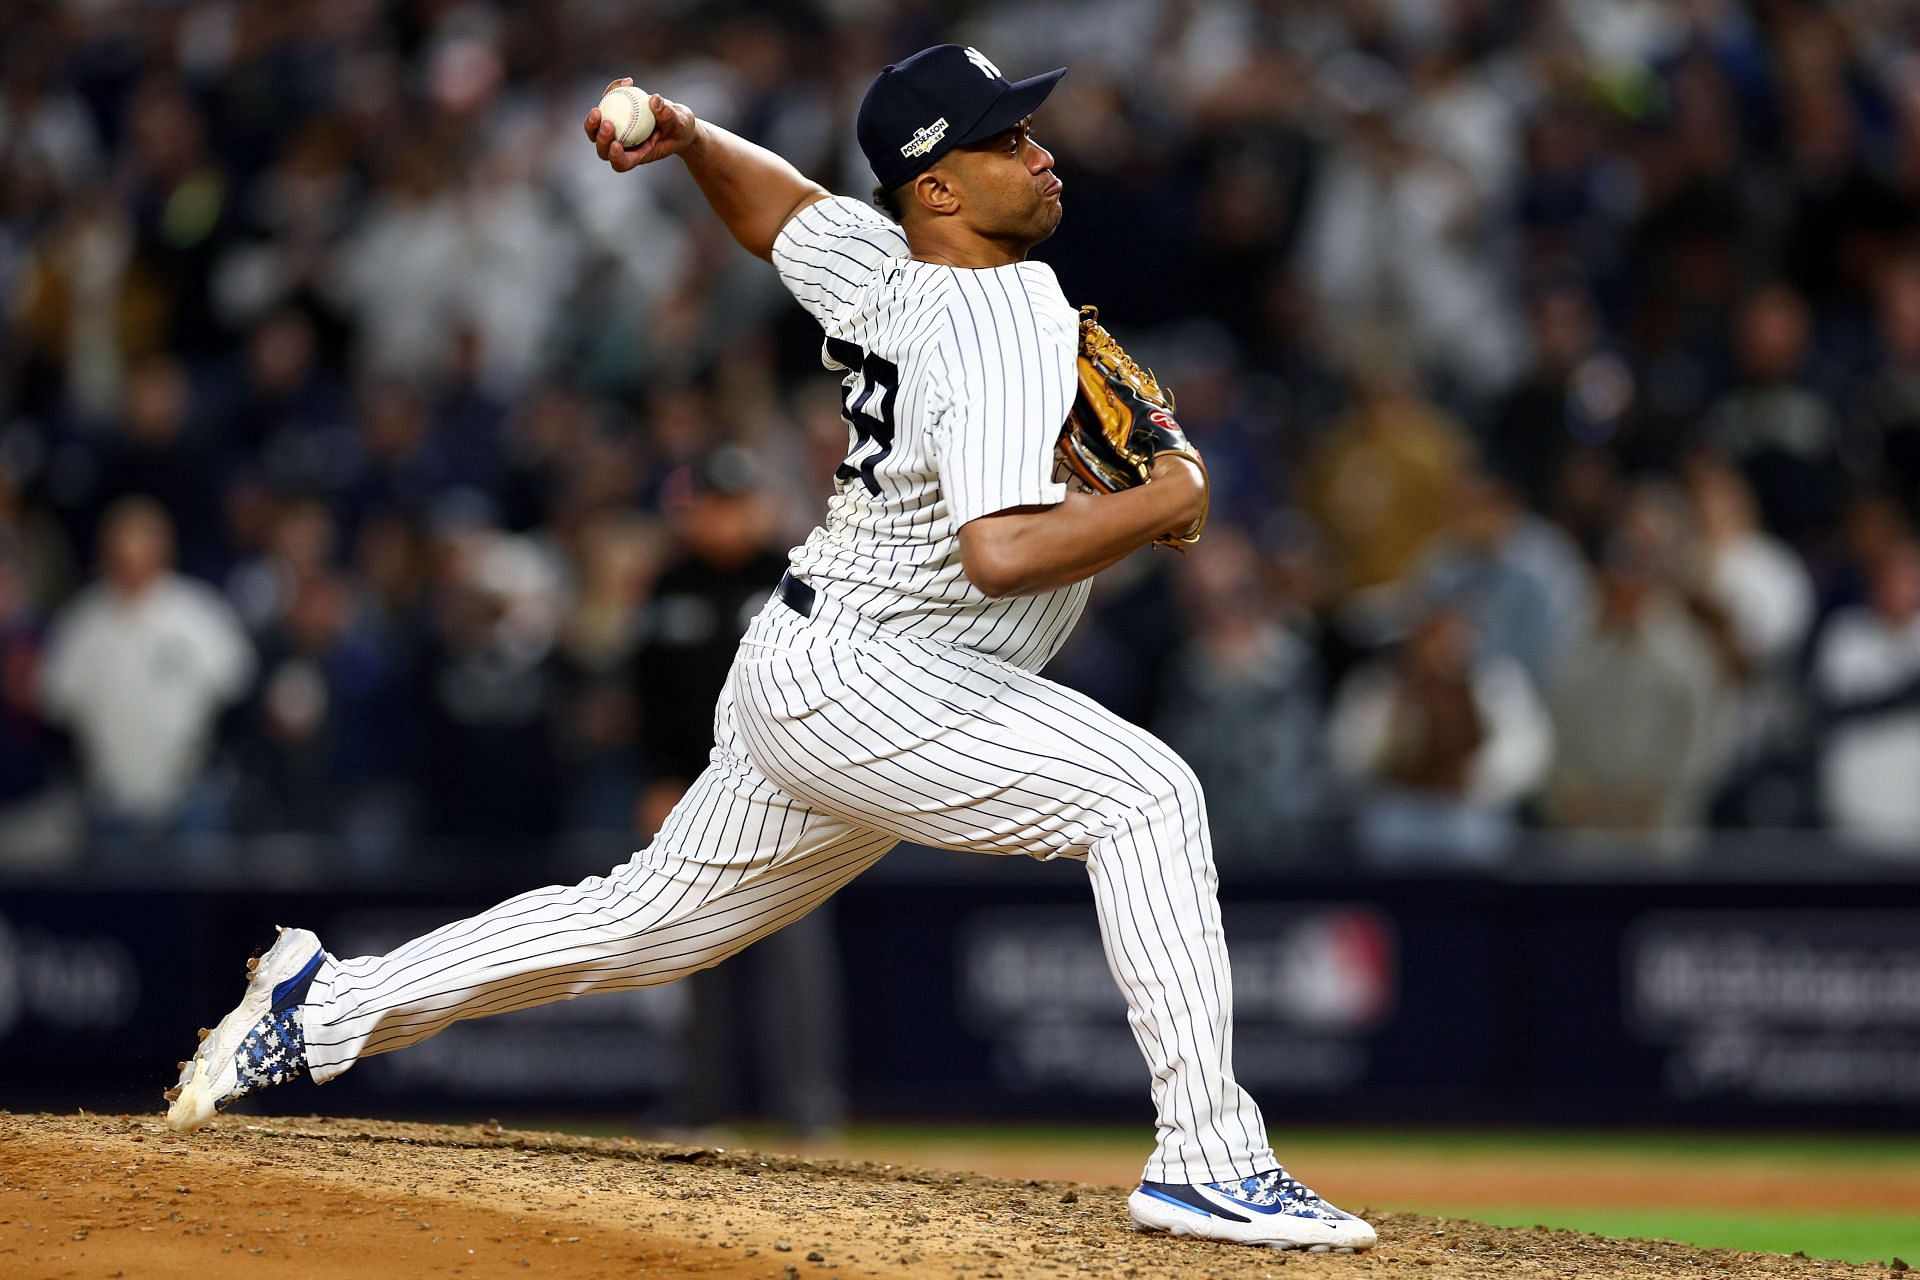 MLB News Roundup: New York Yankees' Wandy Peralta strikes out hitter in 20  seconds, Miguel Rojas withdraws from team Venezuela, and more - March 3 2023